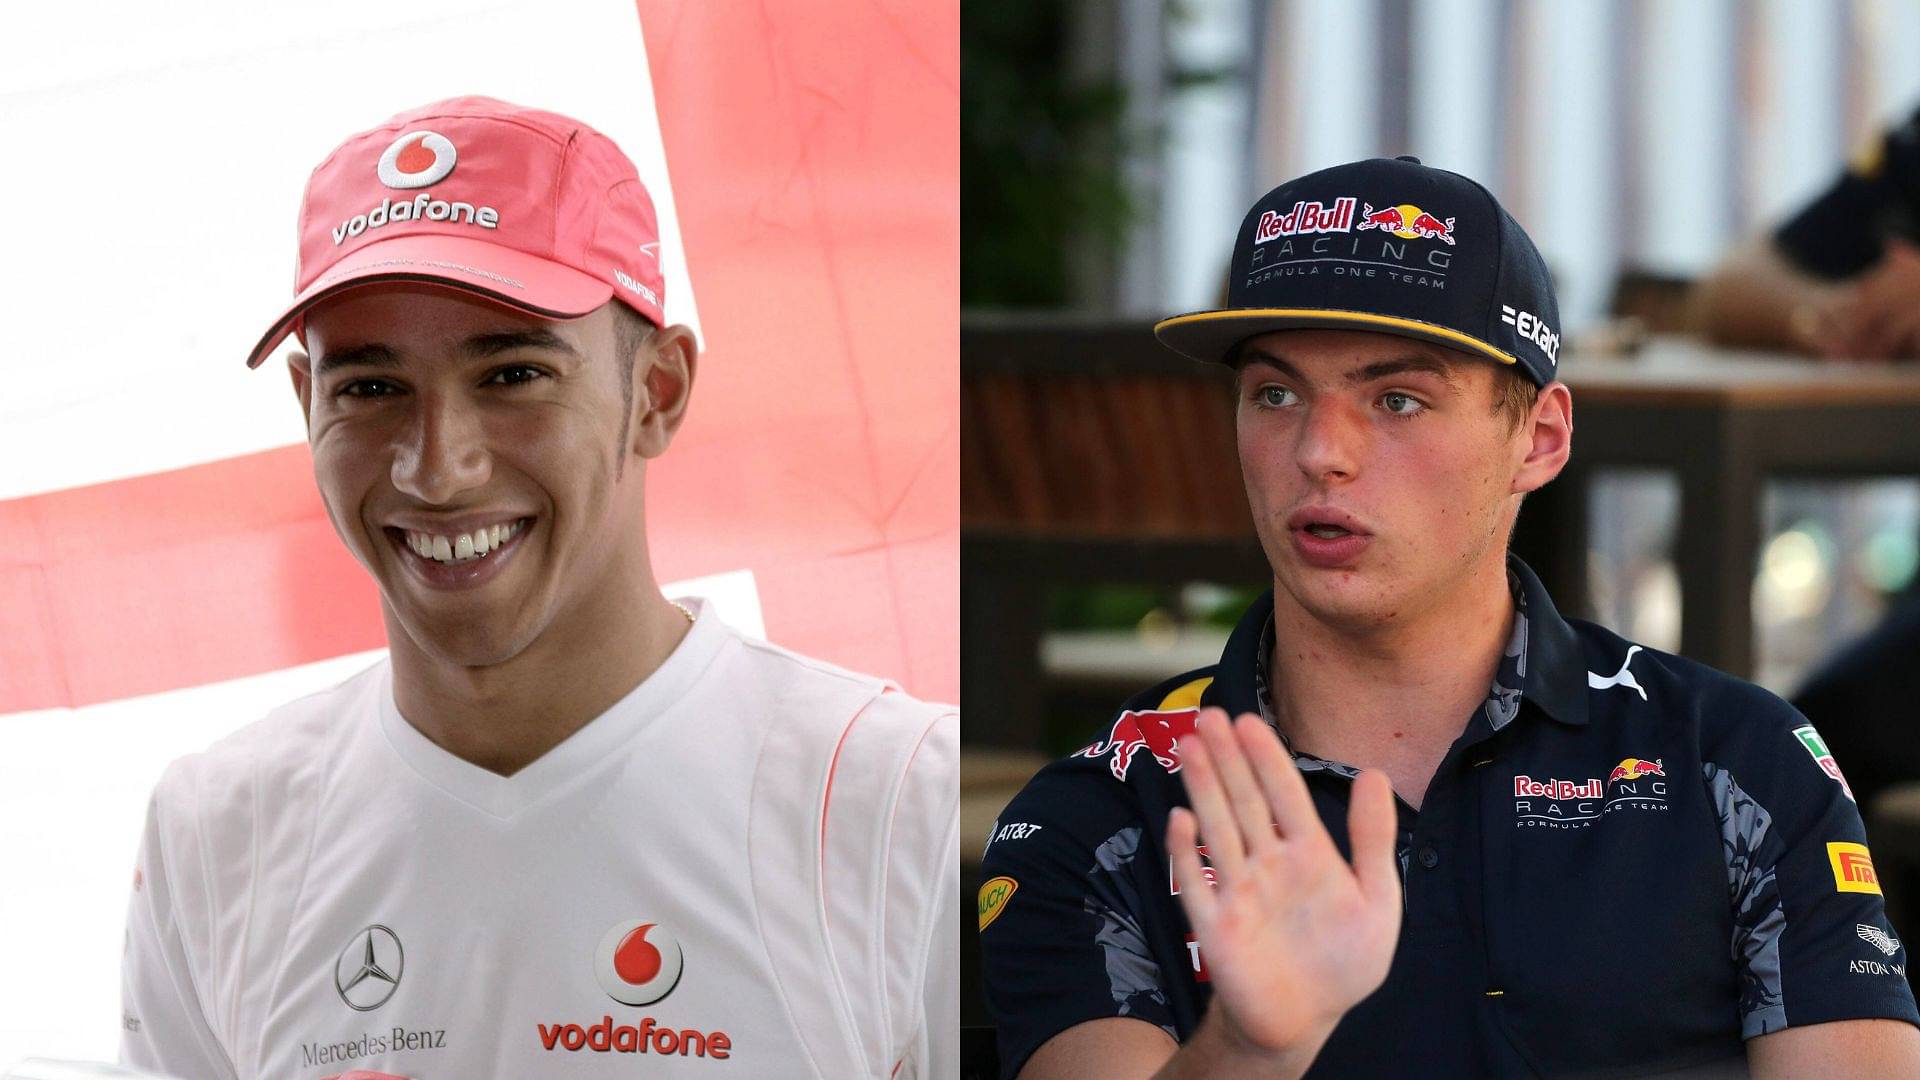 Max Verstappen vs Lewis Hamilton: Comparing the Rookie Season Stats of the Last Two World Champions